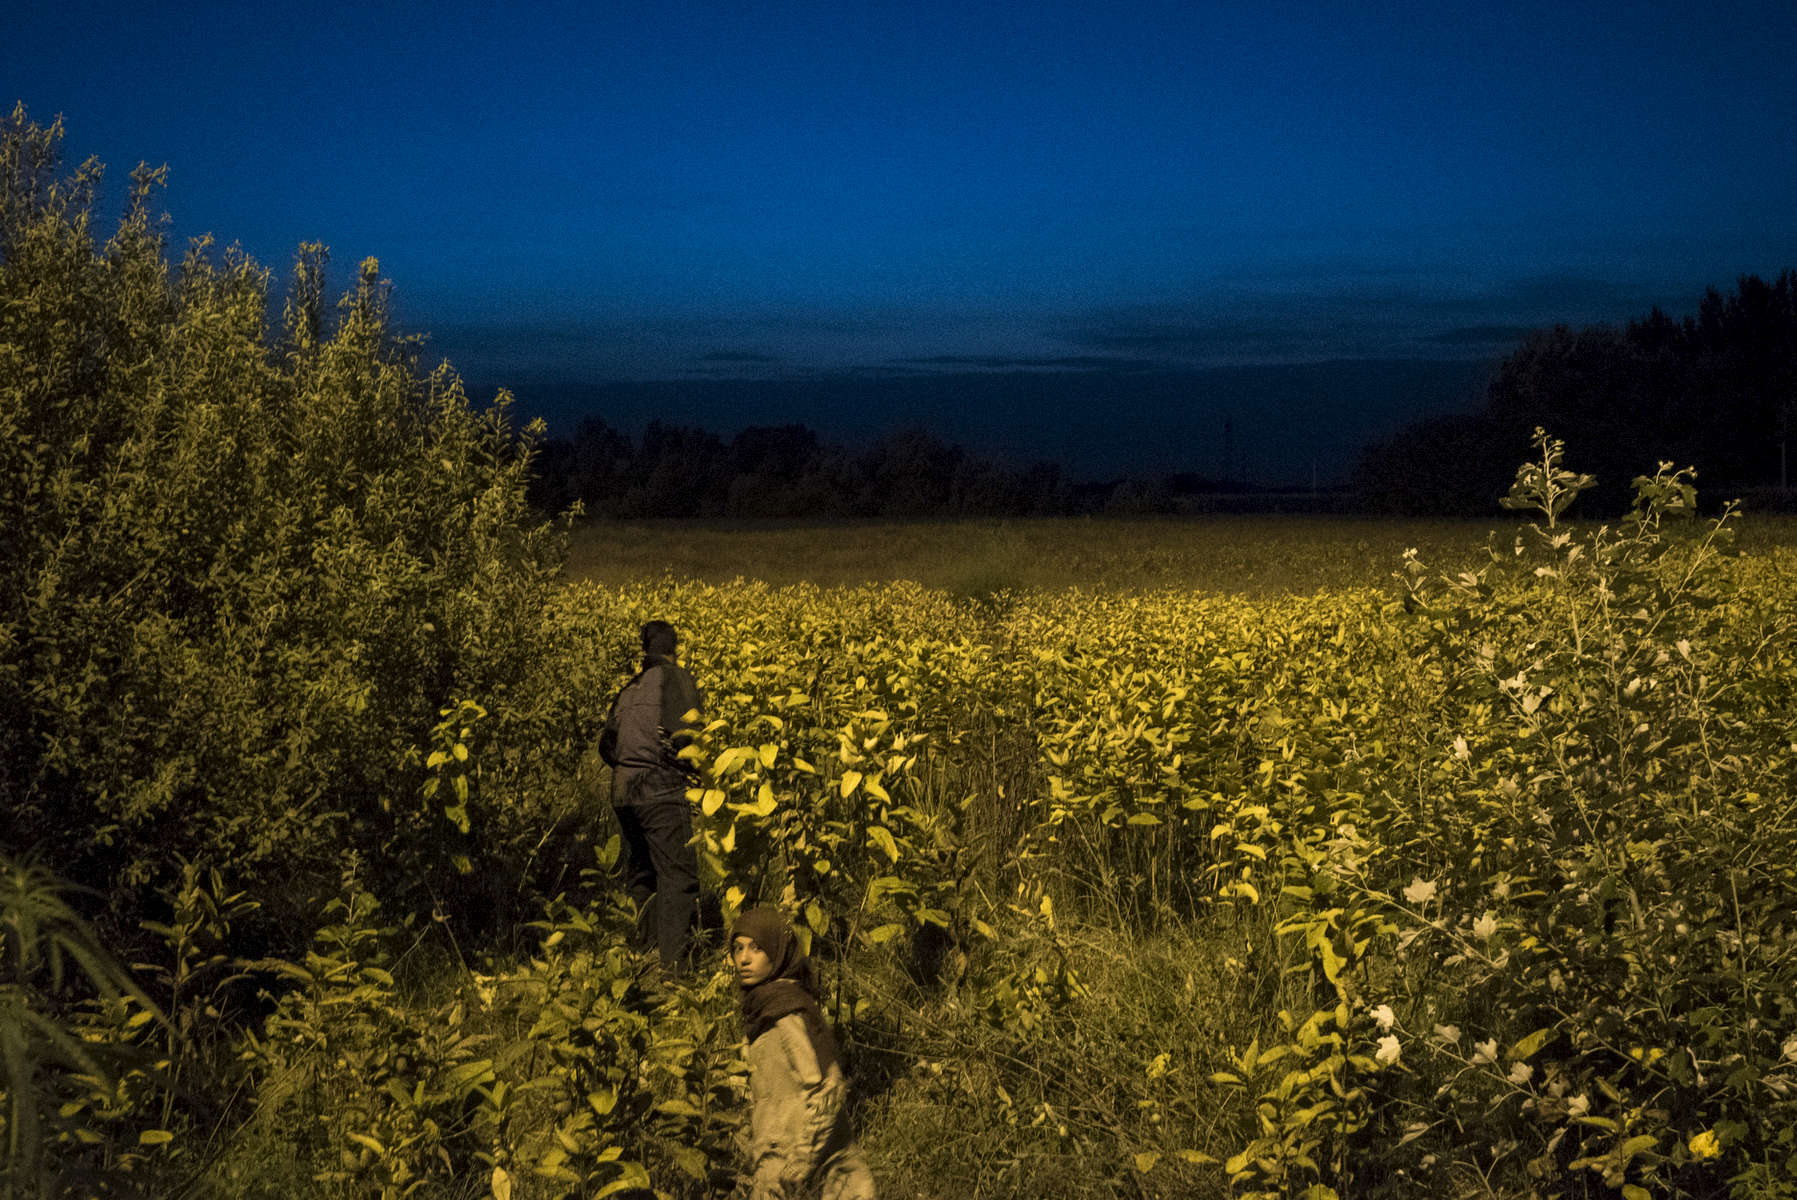 2015.  Horgos.  Serbia.  The closed Serbian-Hungarian border. The border had closed at midnight earlier that day, but thousands of migrants unaware of an alternative route hoped that it would be opened.  At the border fence thousands of migrants set up tents and demonstrated into the night while Hungarian police stood guard on the other side and shined their flashlights at the cameras of photographers attempting to photograph them. It quickly became clear that it wouldn't reopen and the next morning most pivoted towards Croatia.  There were clashes the next day at the border, and Hungarian riot police tear gassed dozens of migrants.